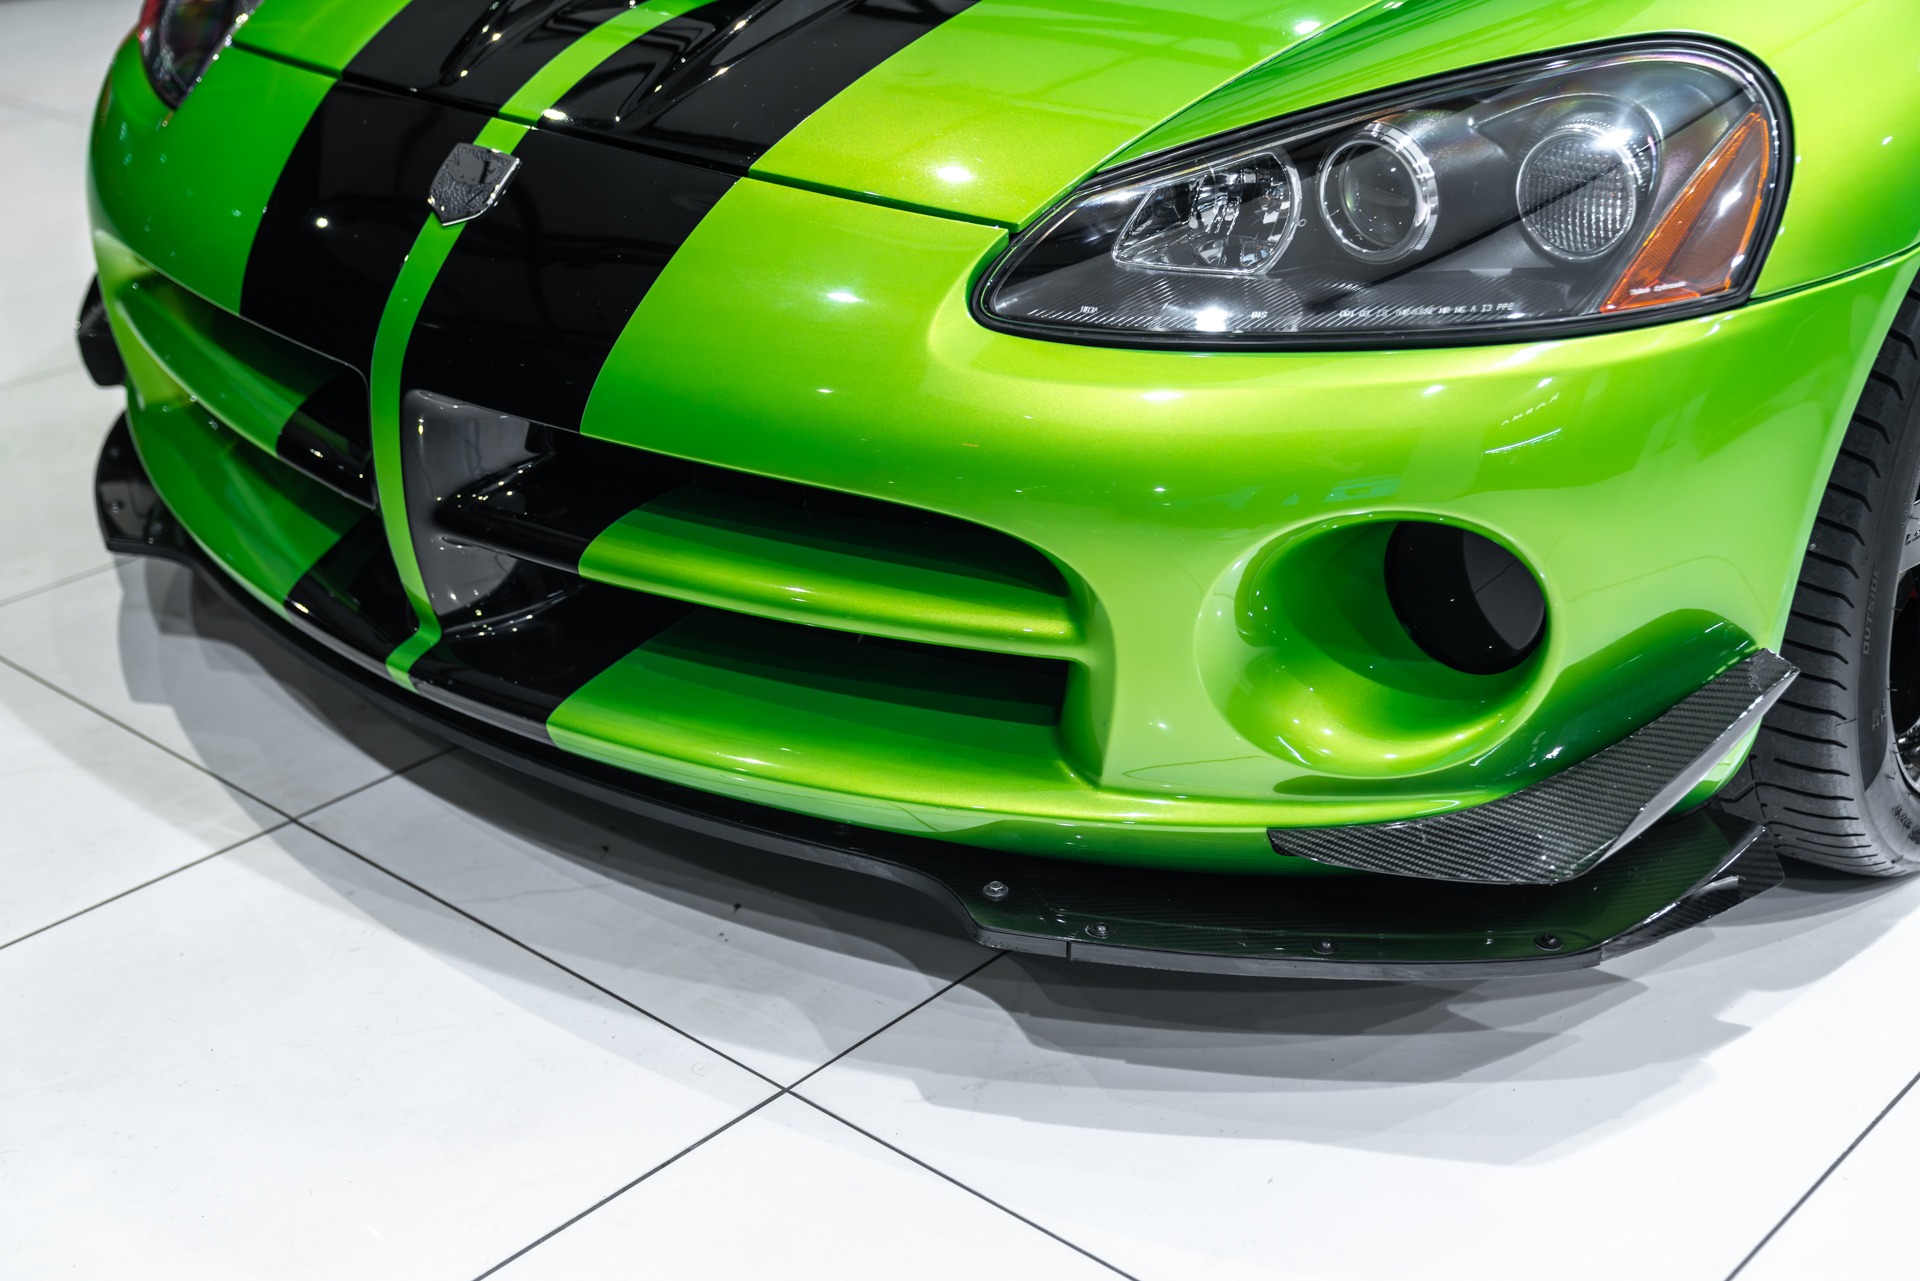 Used-2010-Dodge-Viper-SRT-10-ACR-Coupe-6-Speed-Manual-Snakeskin-Green-Pearl-LOW-Miles-RARE